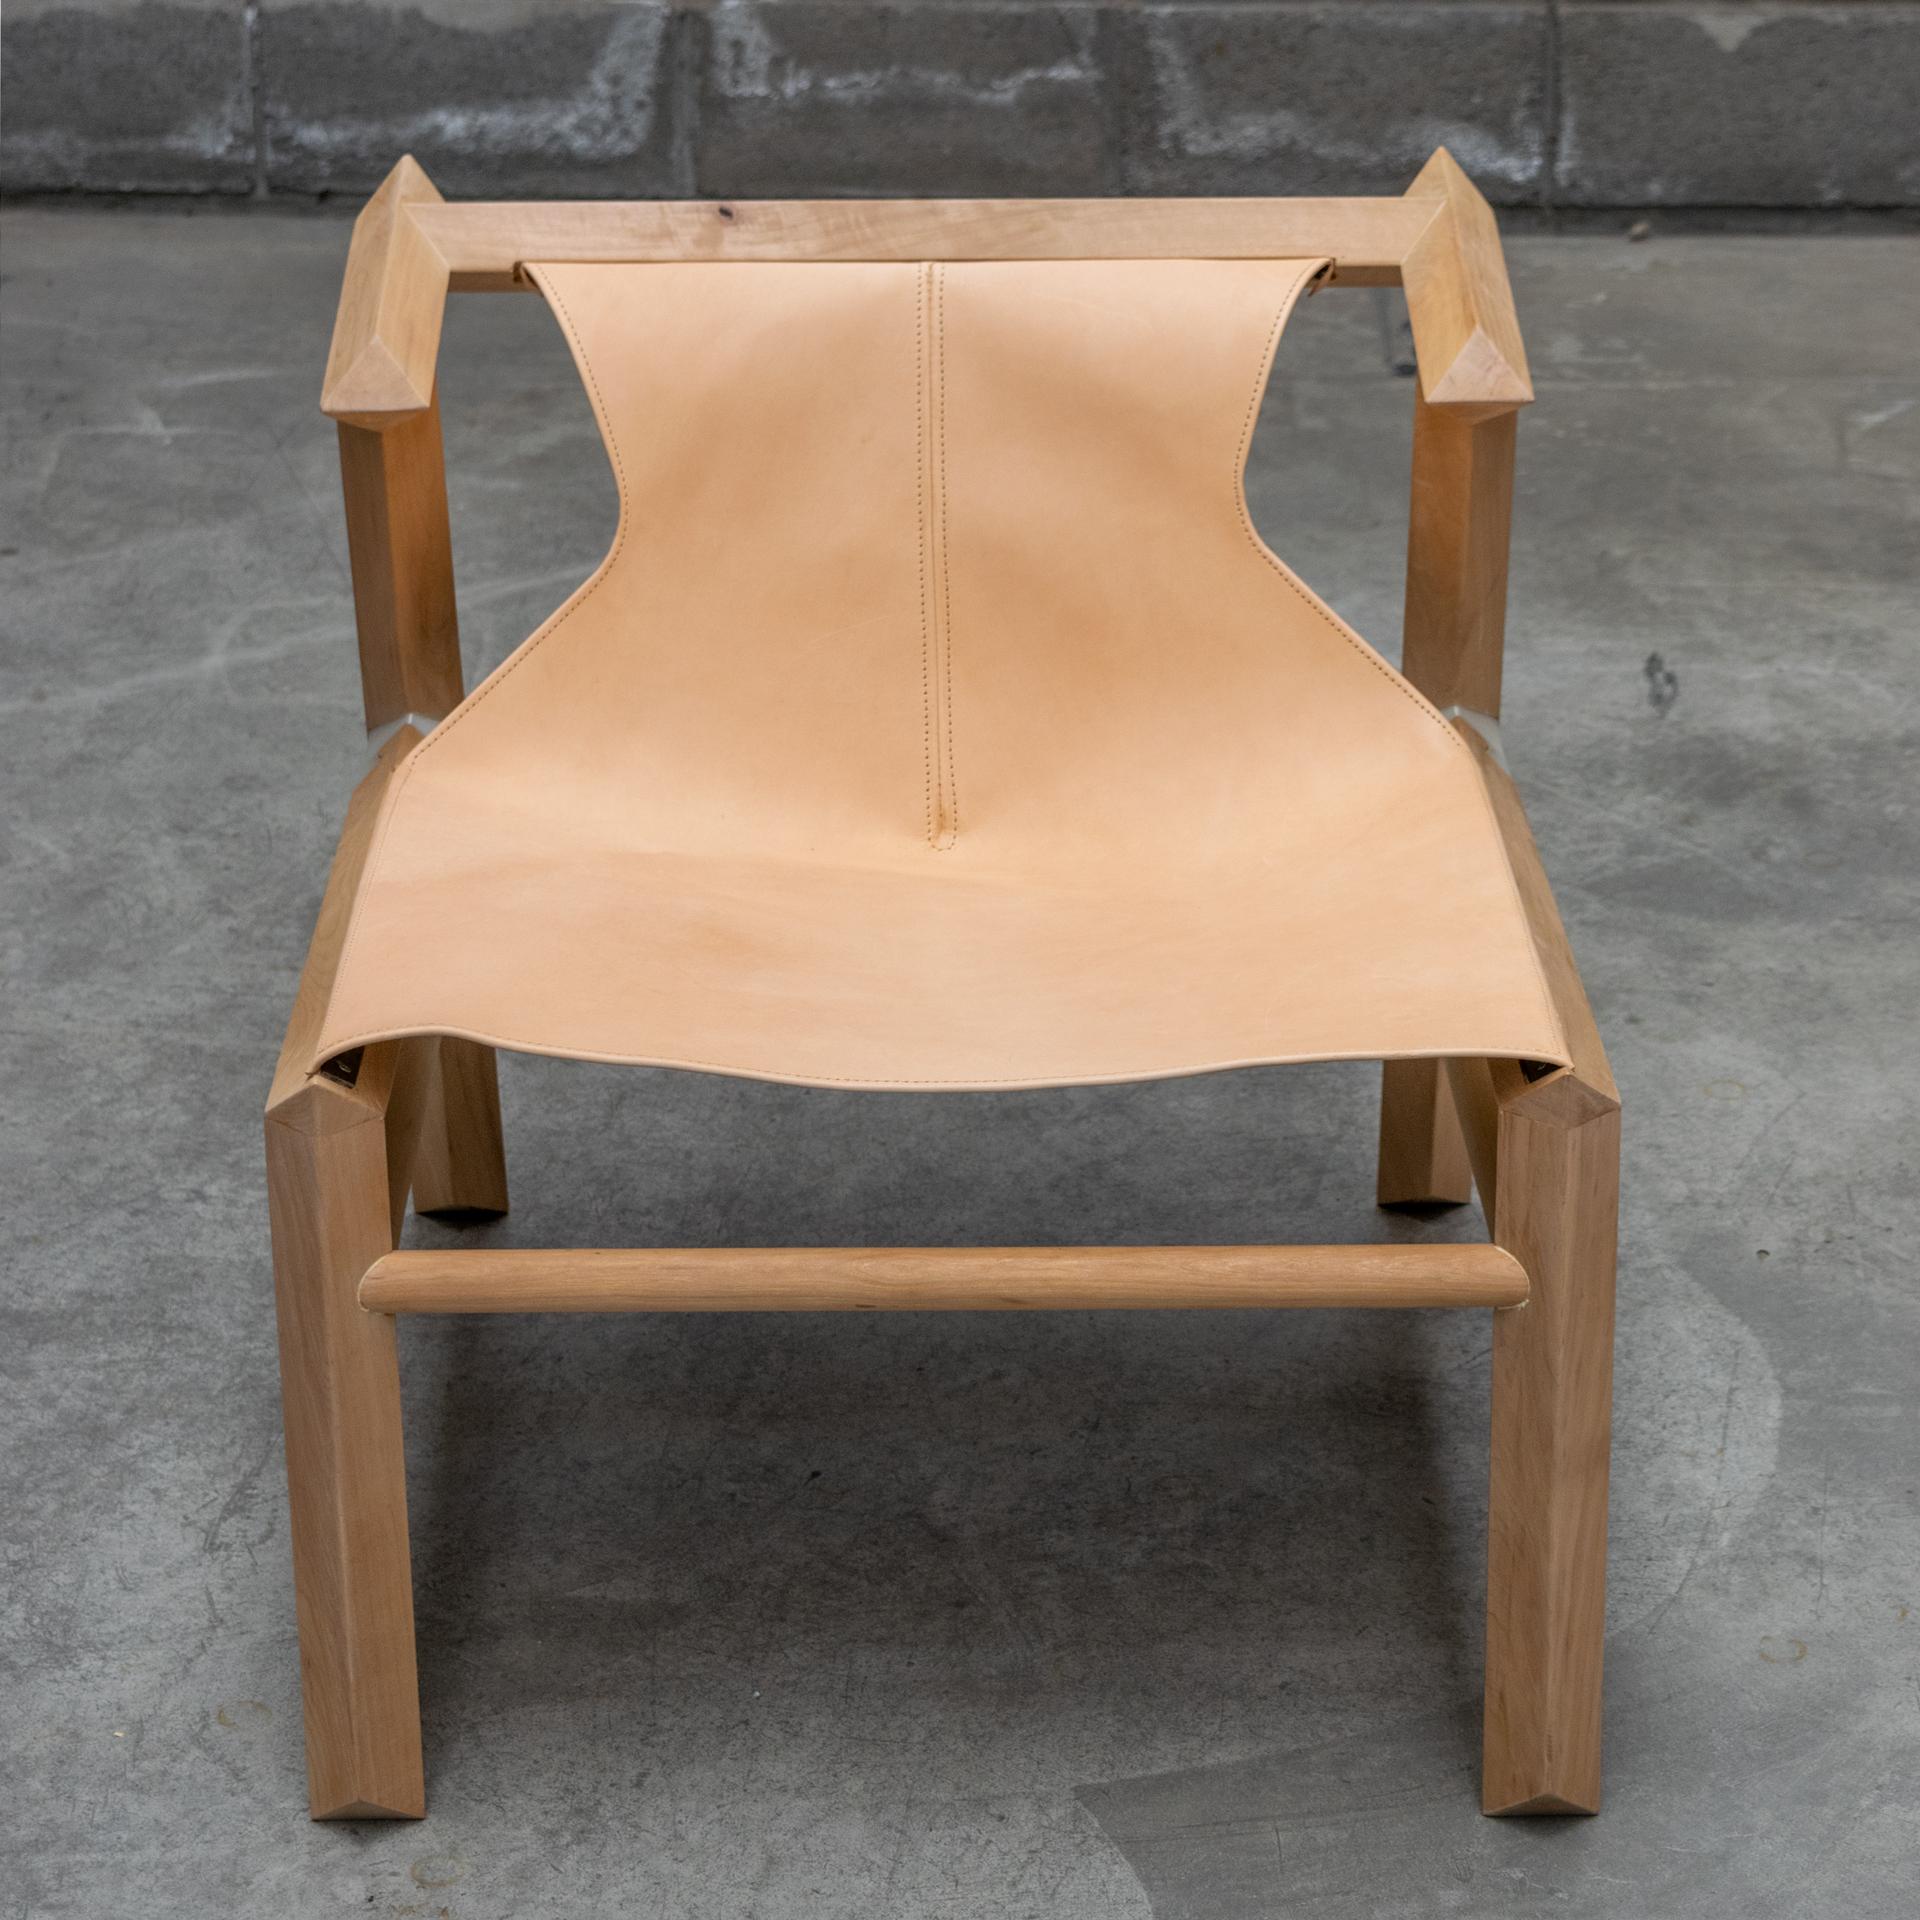 Minimalist Lounge chair in wood and leather from Patagonia For Sale